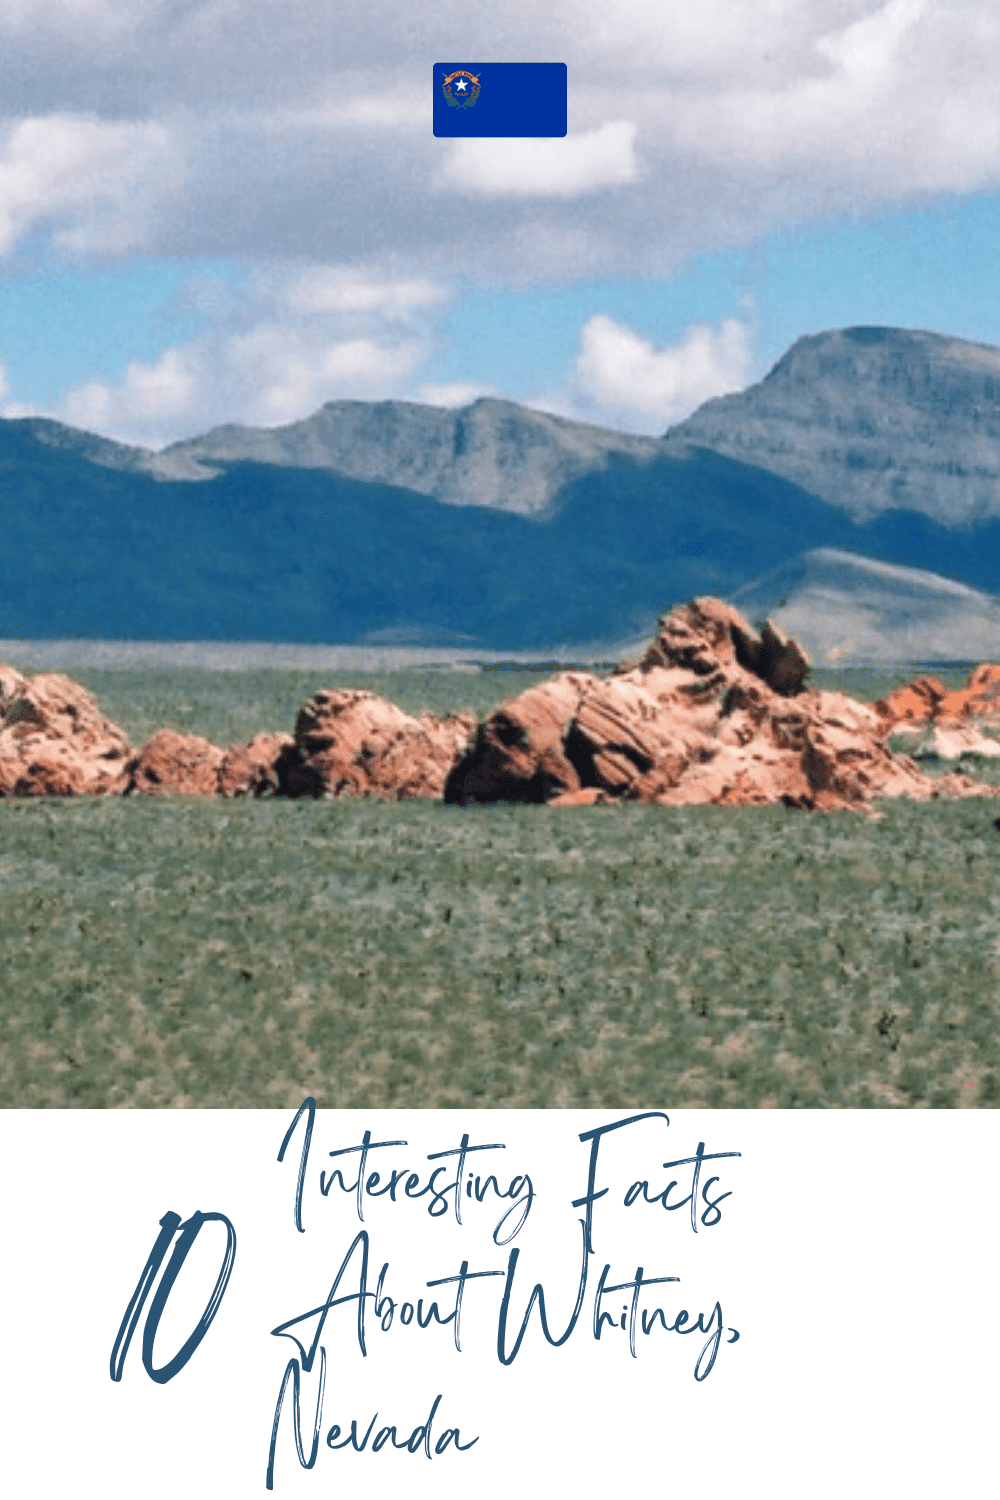 Facts About Whitney, Nevada